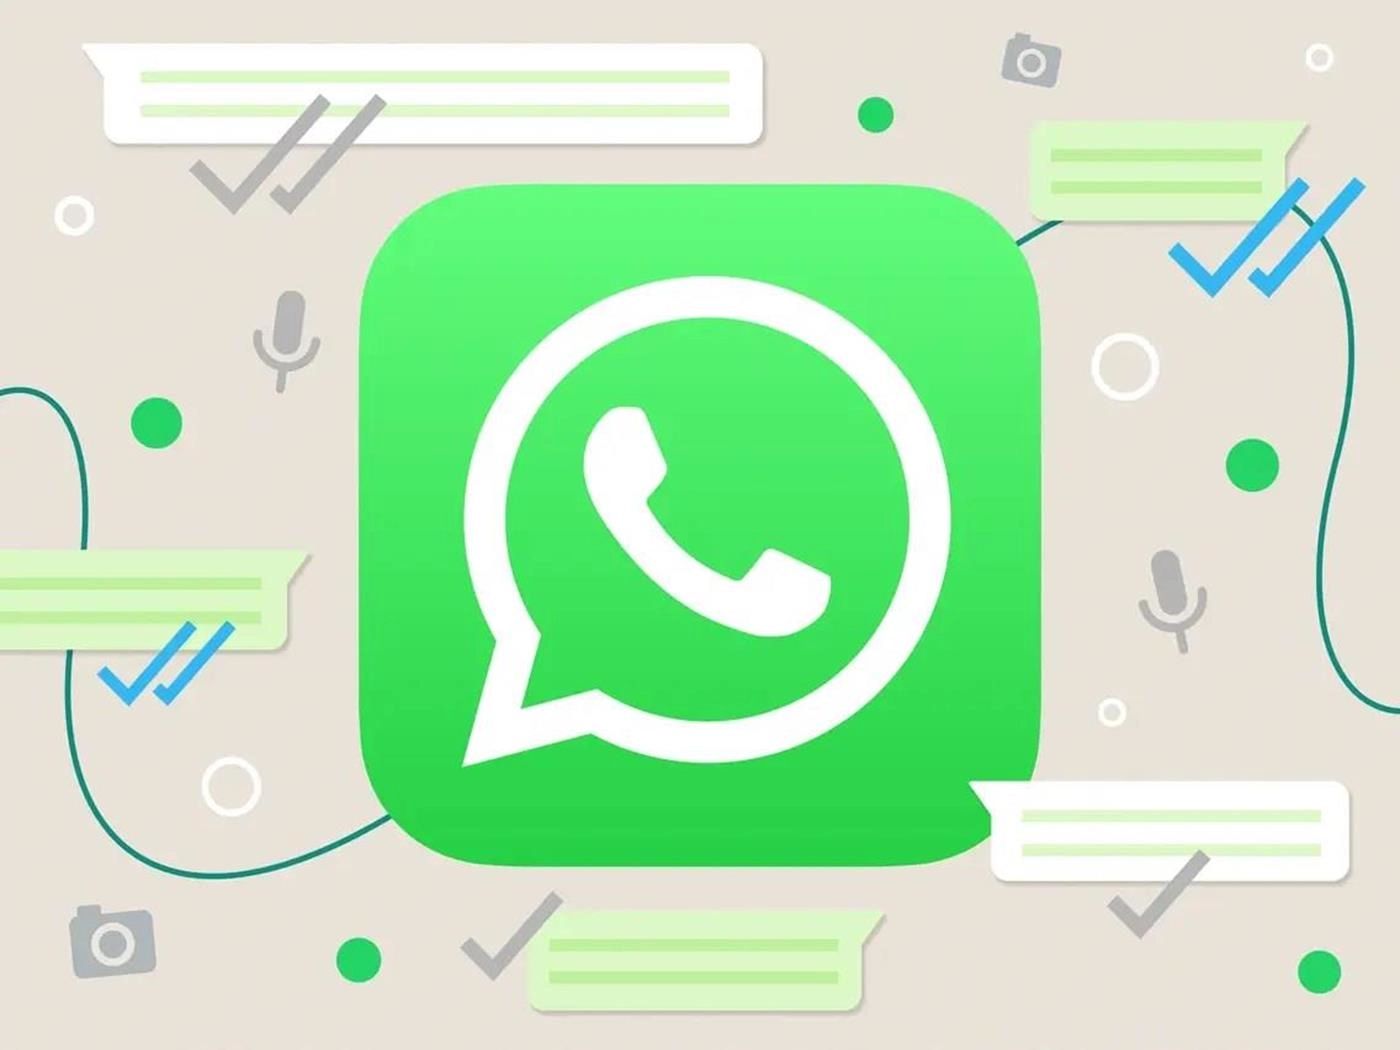 How to use WhatsApp's message editing feature